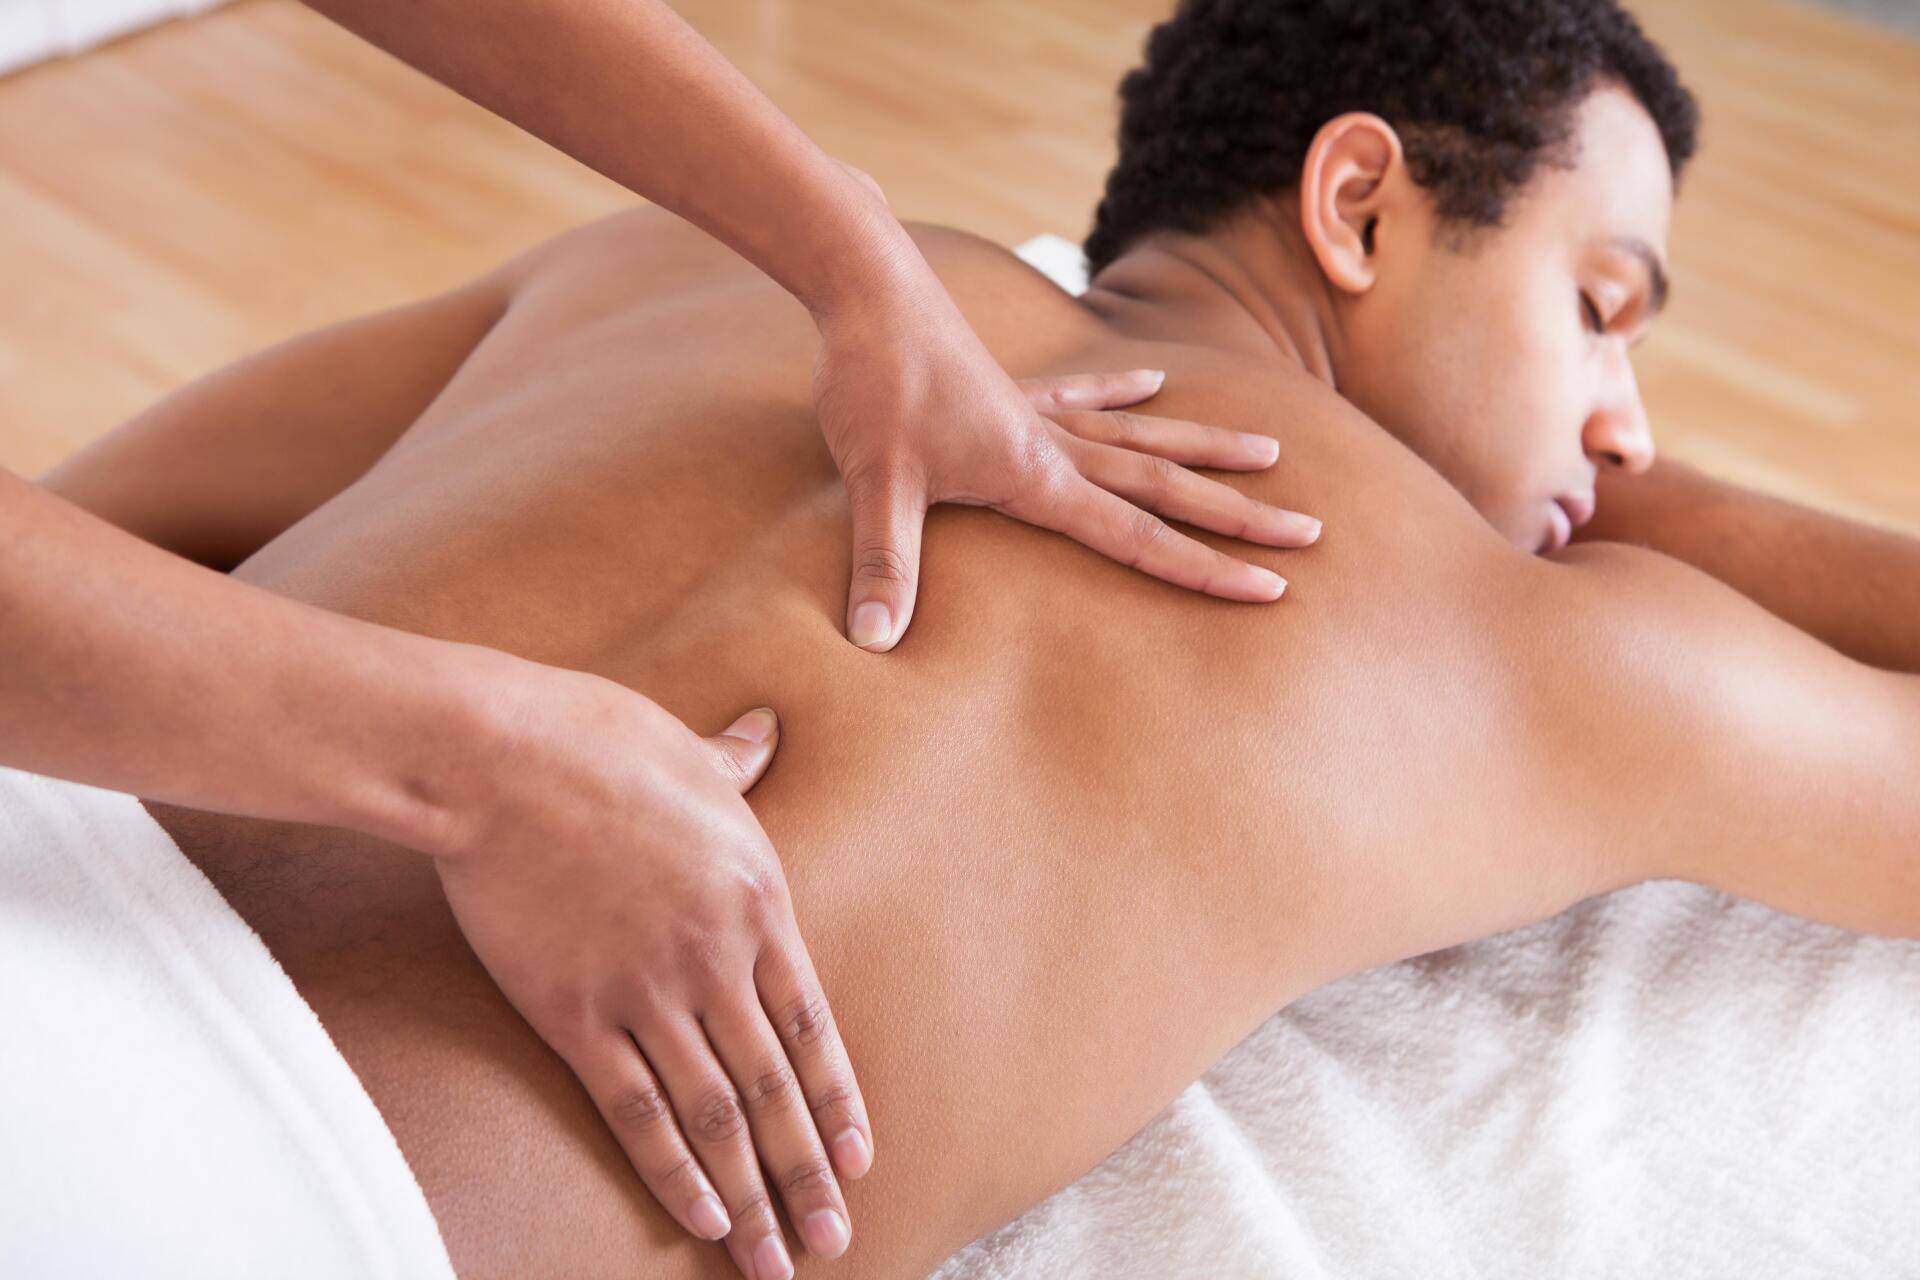 Customized Massage For Stress, Tension And Pain.